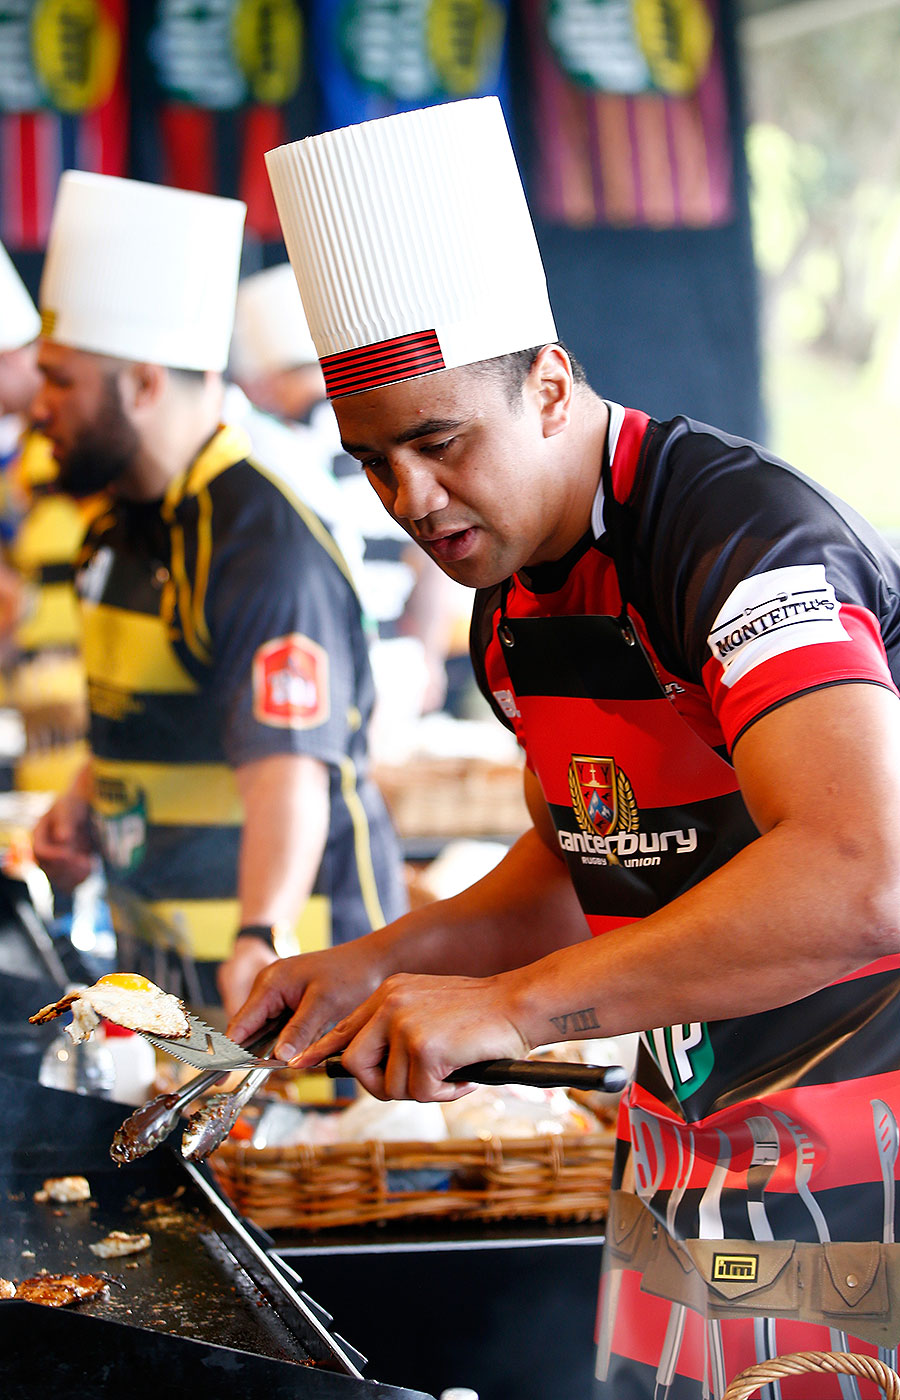 Canterbury's Nasi Manu cooks during a hamburger competition at the ITM Cup season launch